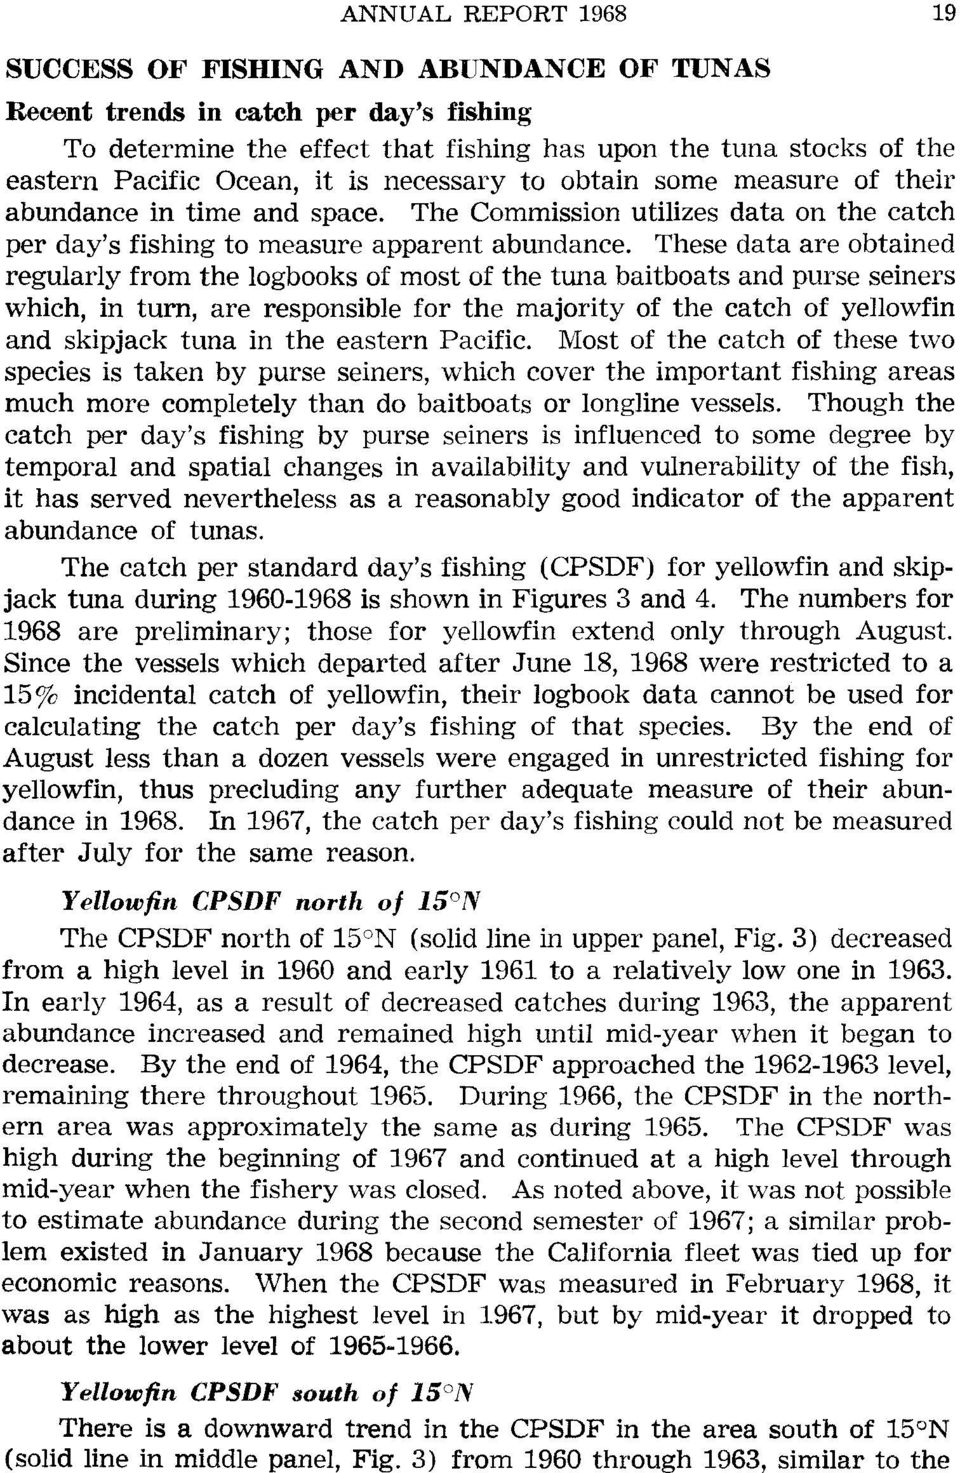 These data are obtained regularly from the logbooks of most of the tuna baitboats and purse seiners which, in turn, are responsible for the majority of the catch of yellowfin and skipjack tuna in the